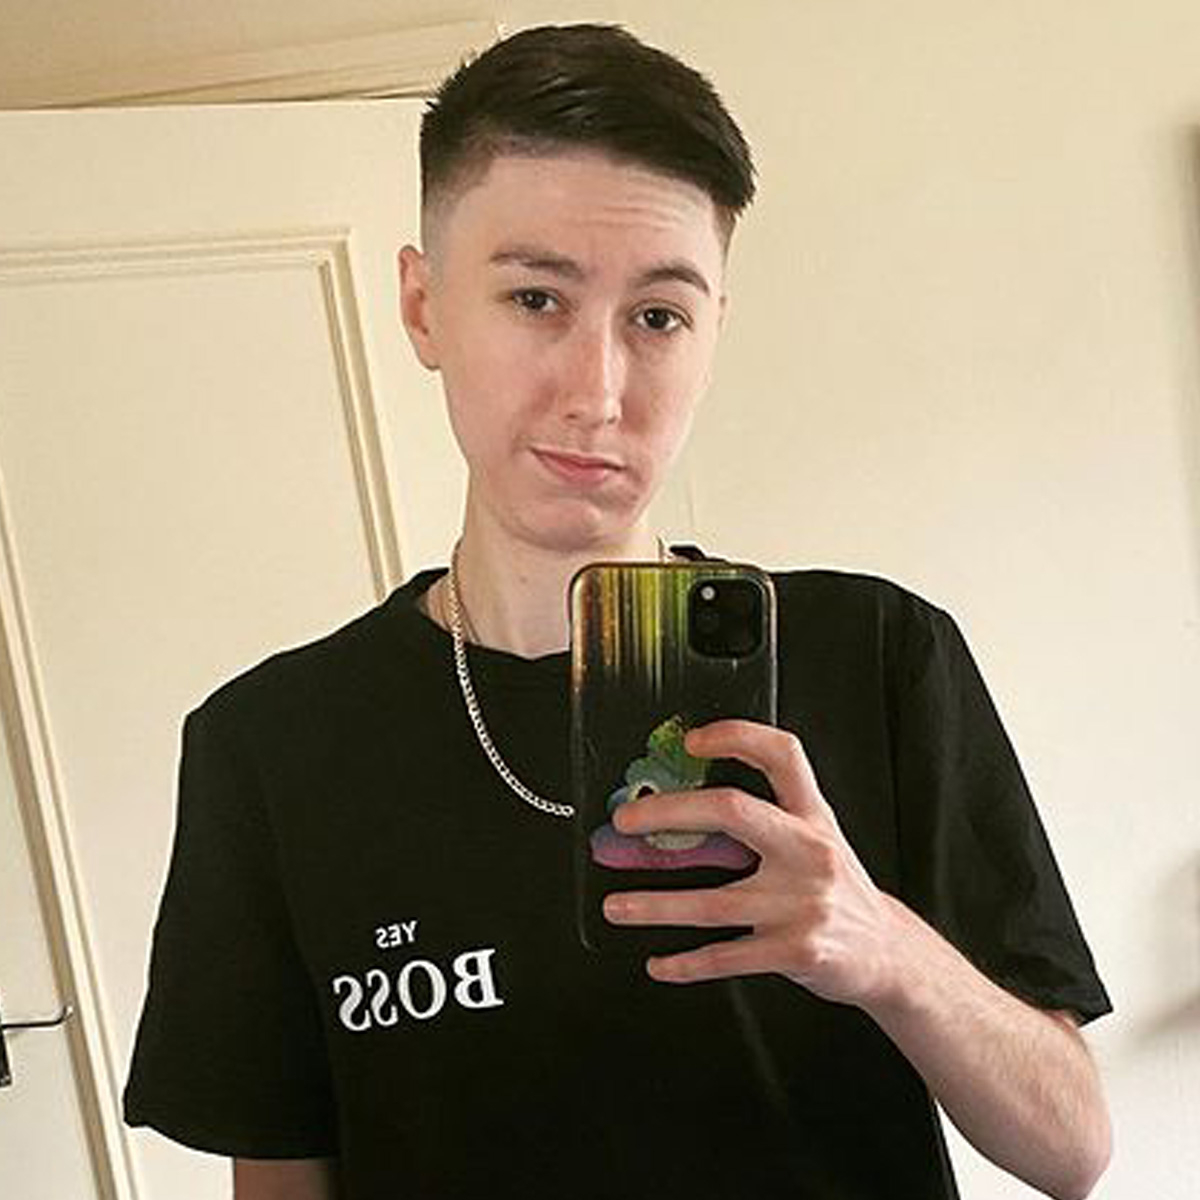 Vine’s Tristan Simmonds Starting Testosterone After Sharing He’s Trans